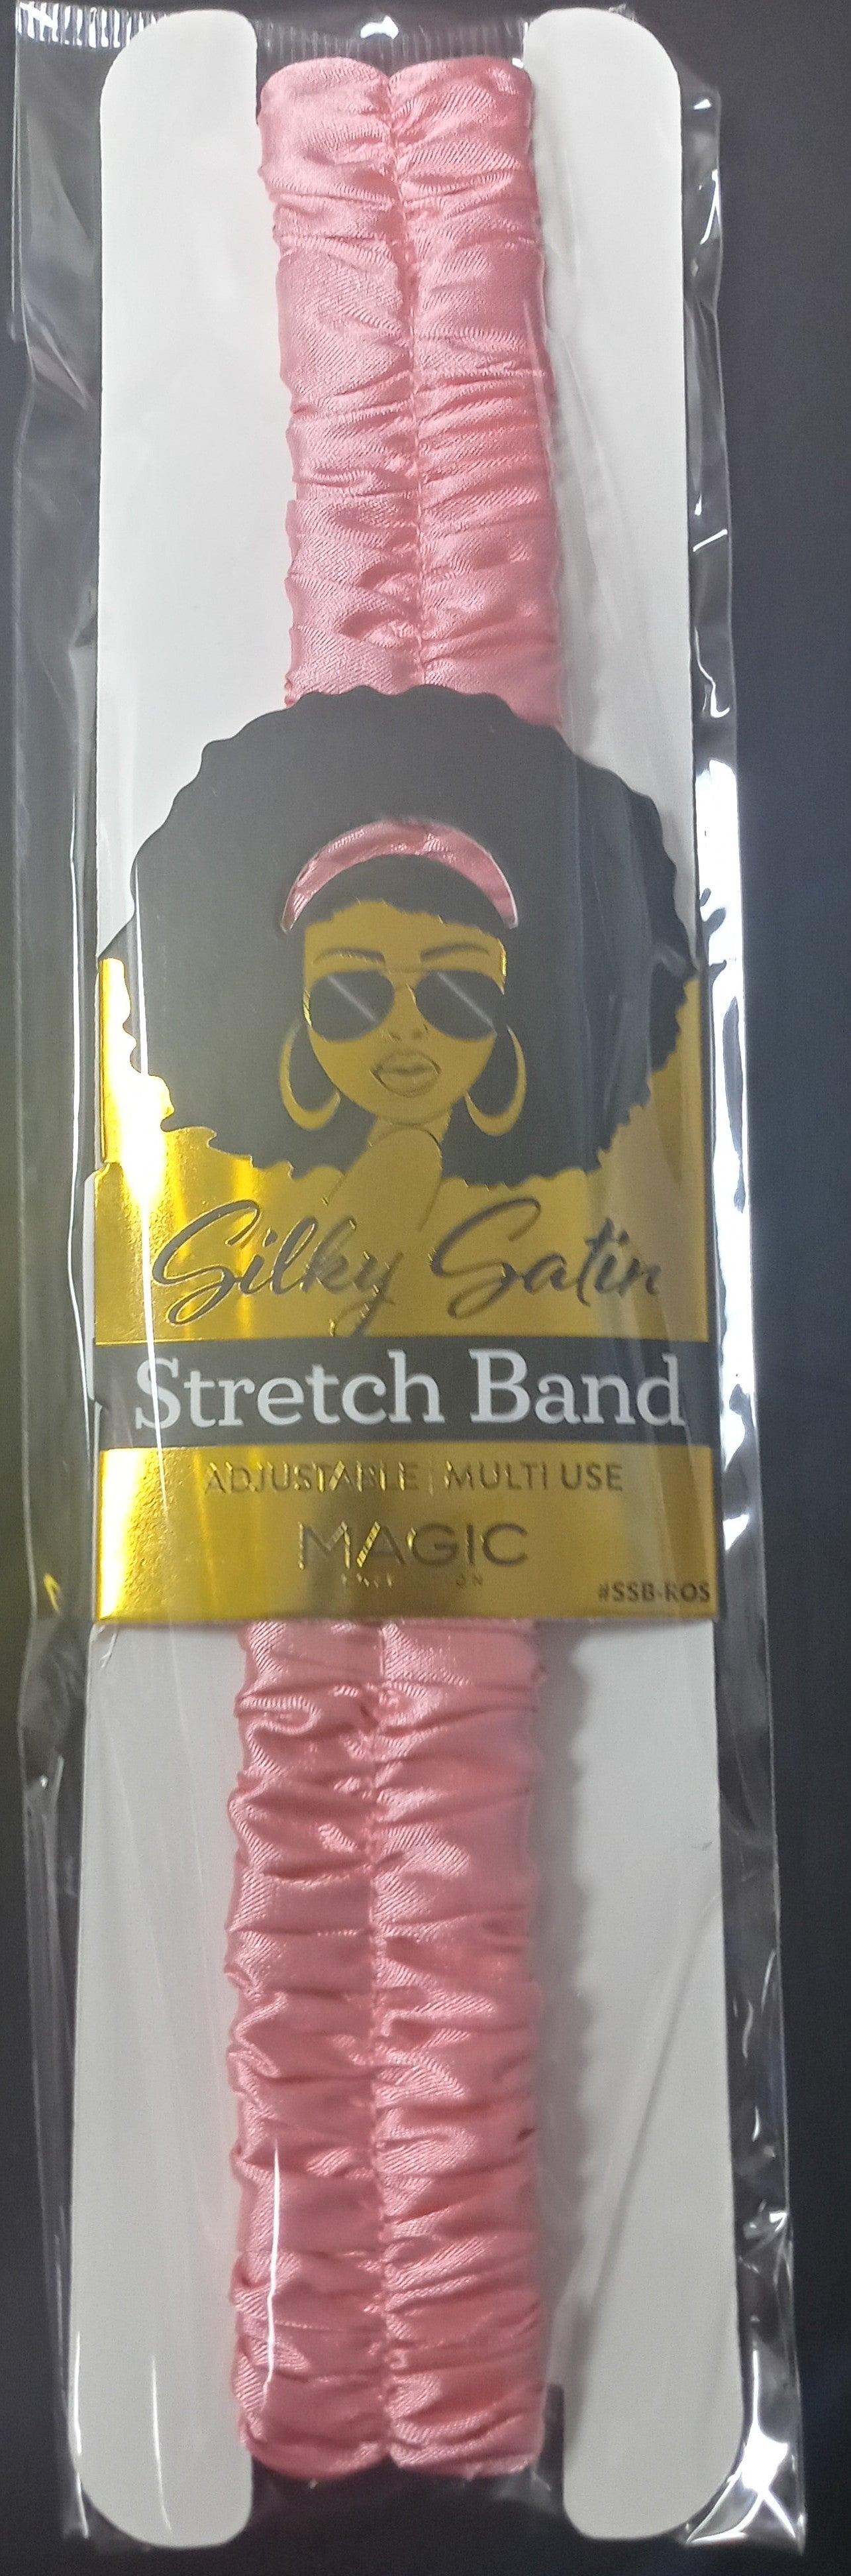 Magic Collection: Silky Satin Stretch Band